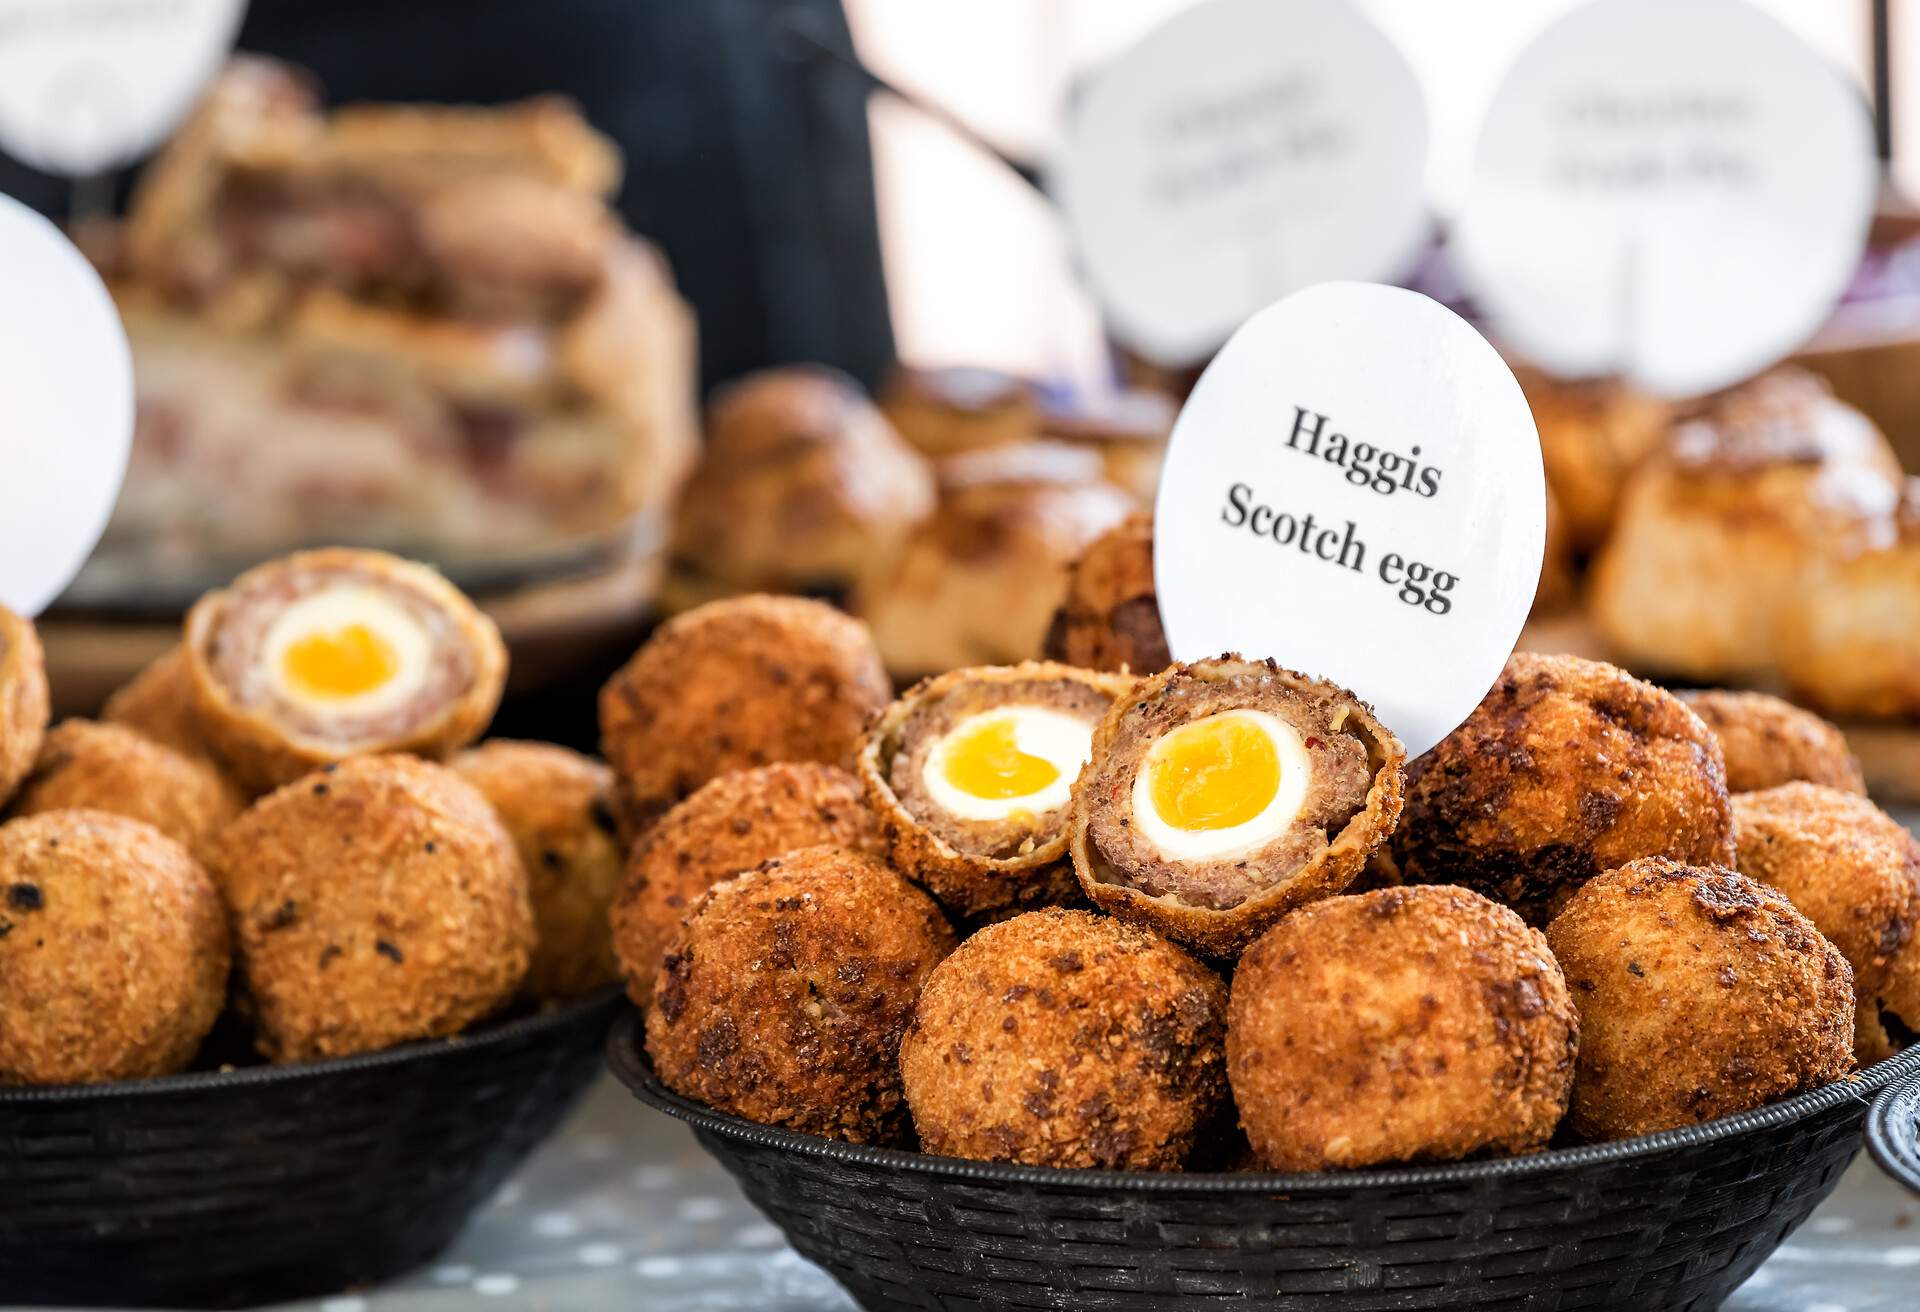 Closeup bowl of Haggis Scotch deep fried eggs with sign in market street food fair, cross section cut open, yellow yolk, breading tradition English food in London, United Kingdom